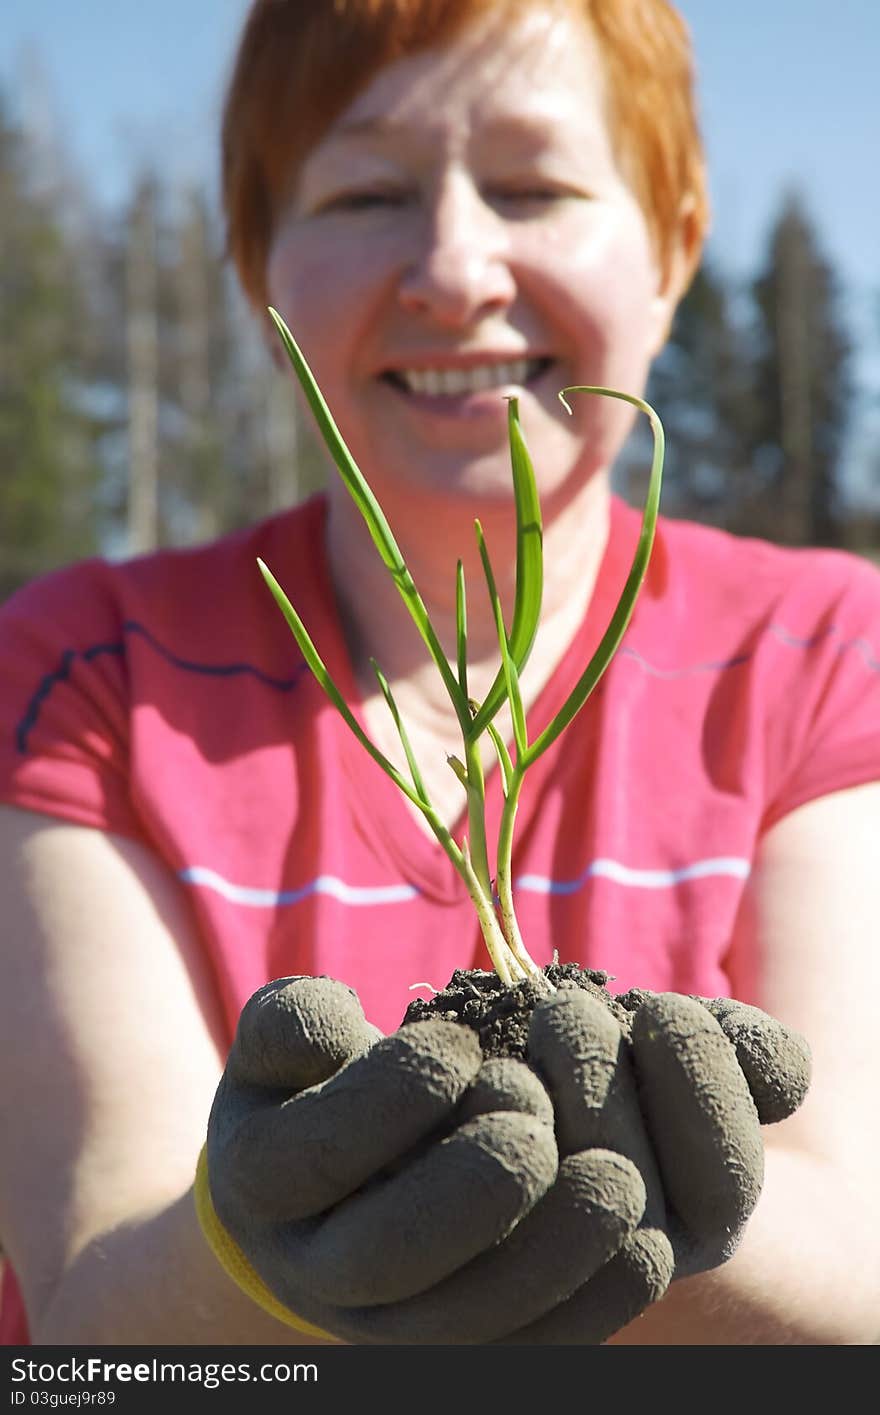 Smiling mature woman holding seedling on her hands. Smiling mature woman holding seedling on her hands